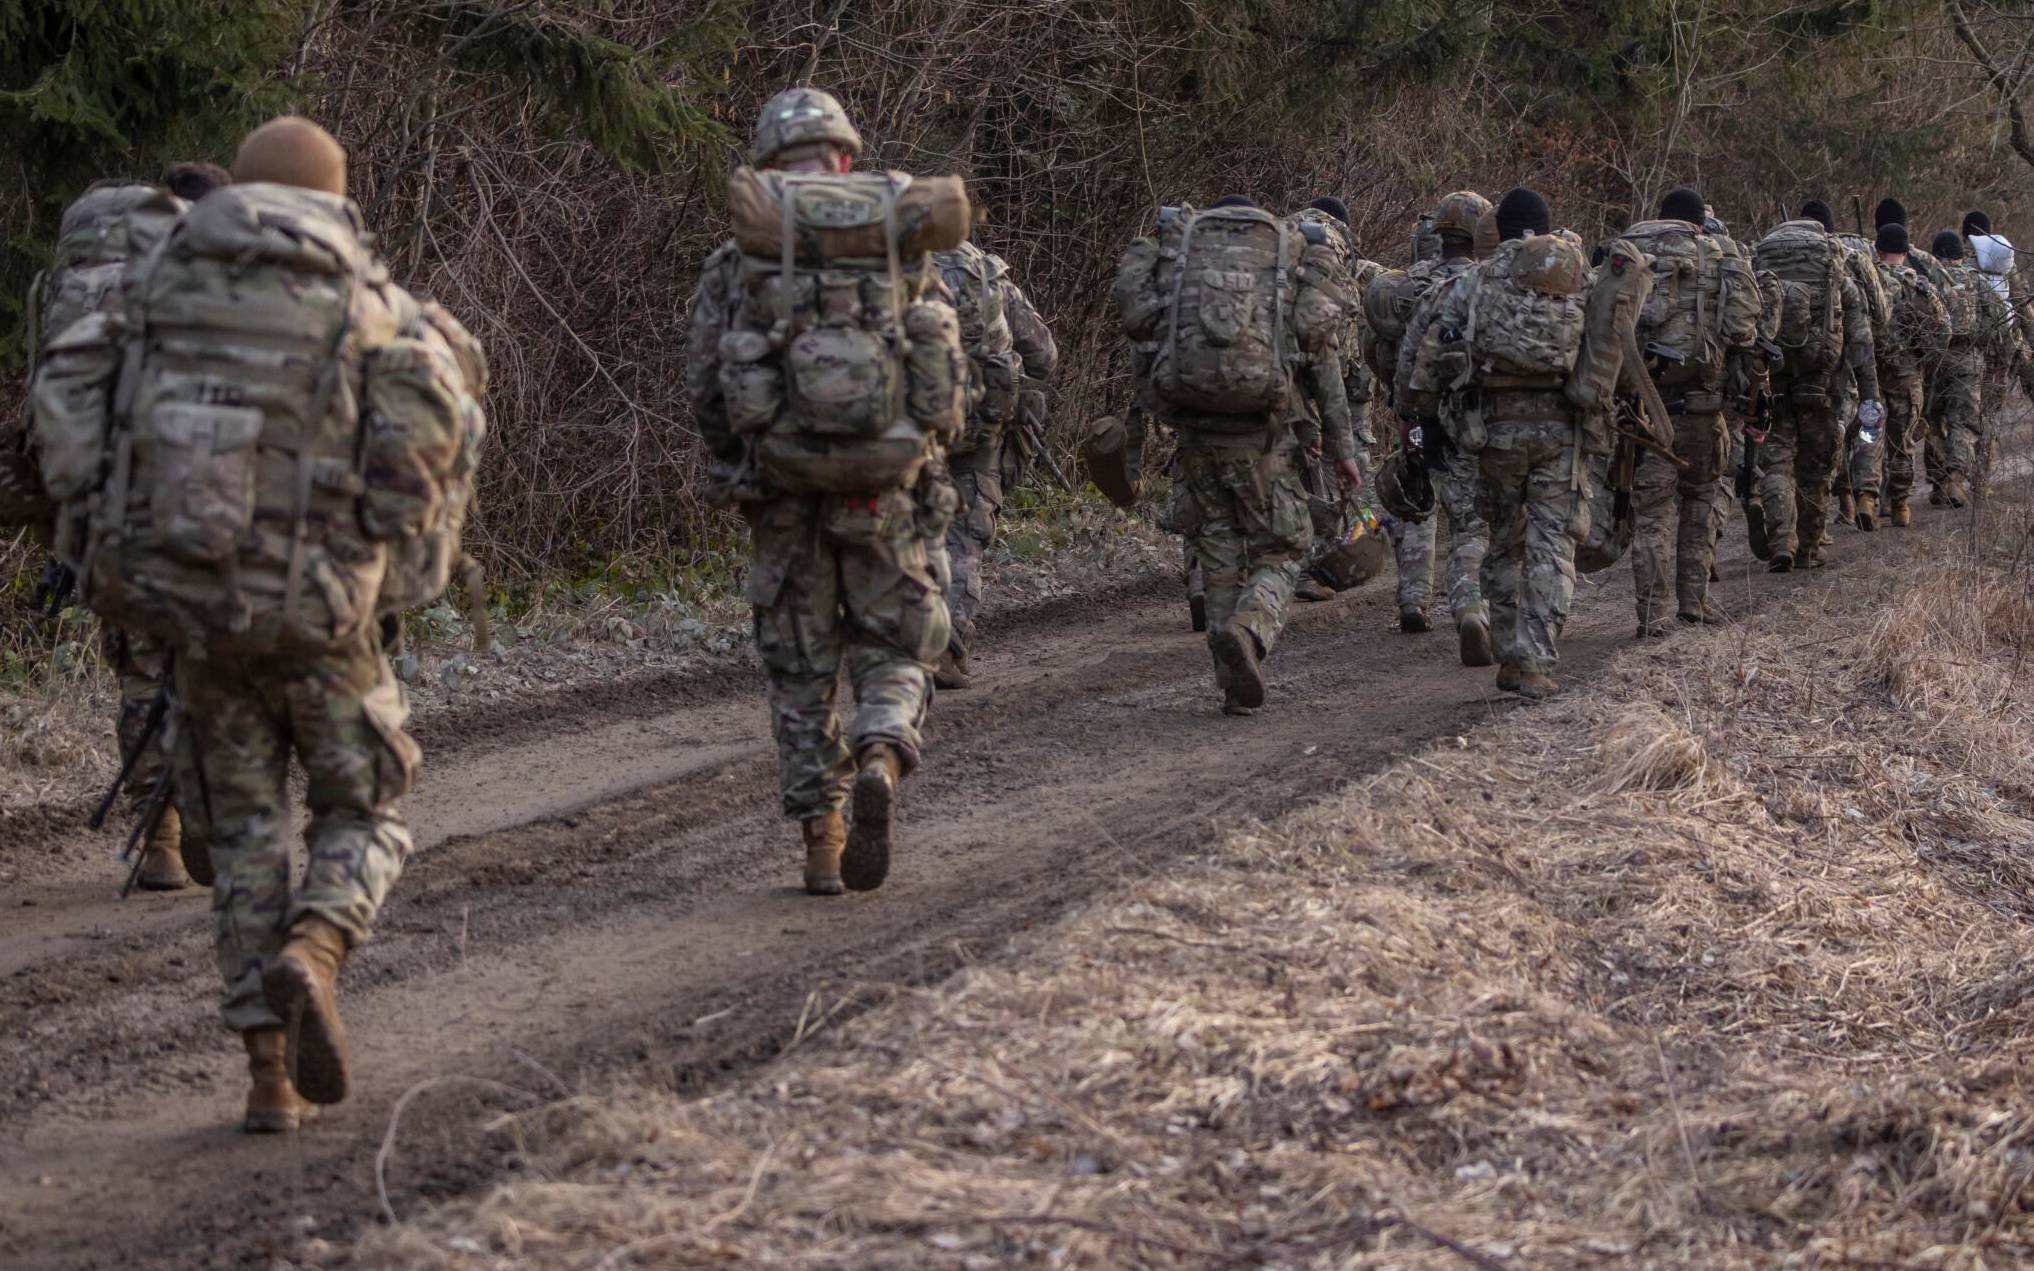 US soldiers are seen near a military camp in Arlamow, southeastern Poland, near the border with Ukraine, on March 3, 2022. (Photo by Wojtek RADWANSKI / AFP)